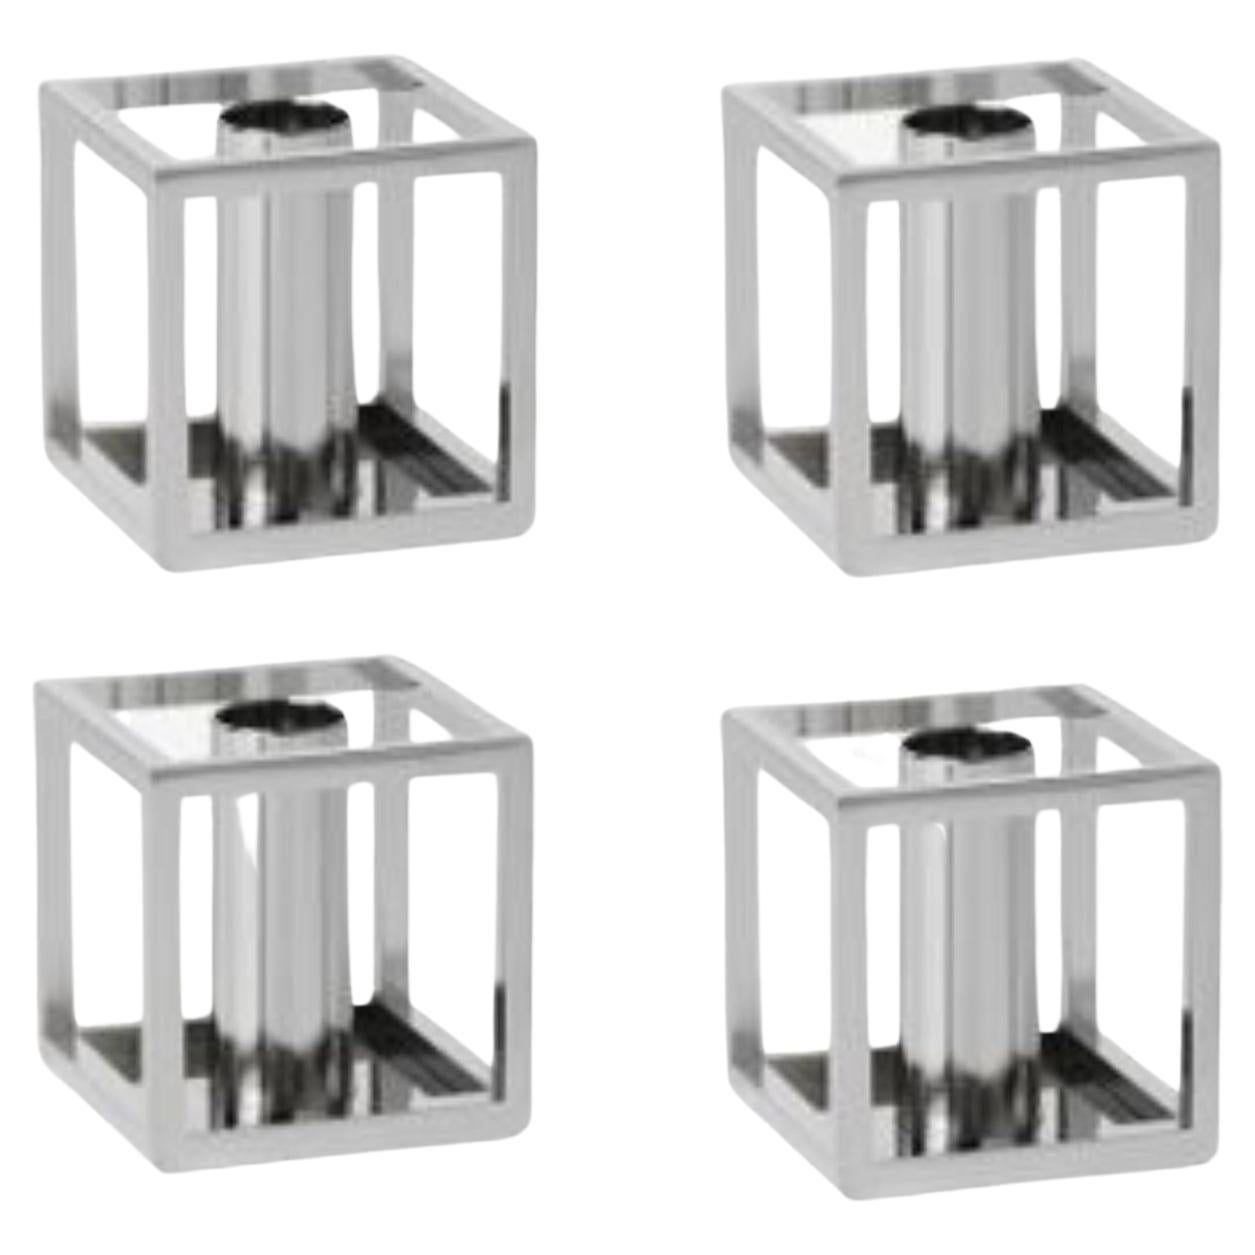 Set of 4 Nickel Plated Kubus 1 Candle Holders by Lassen For Sale